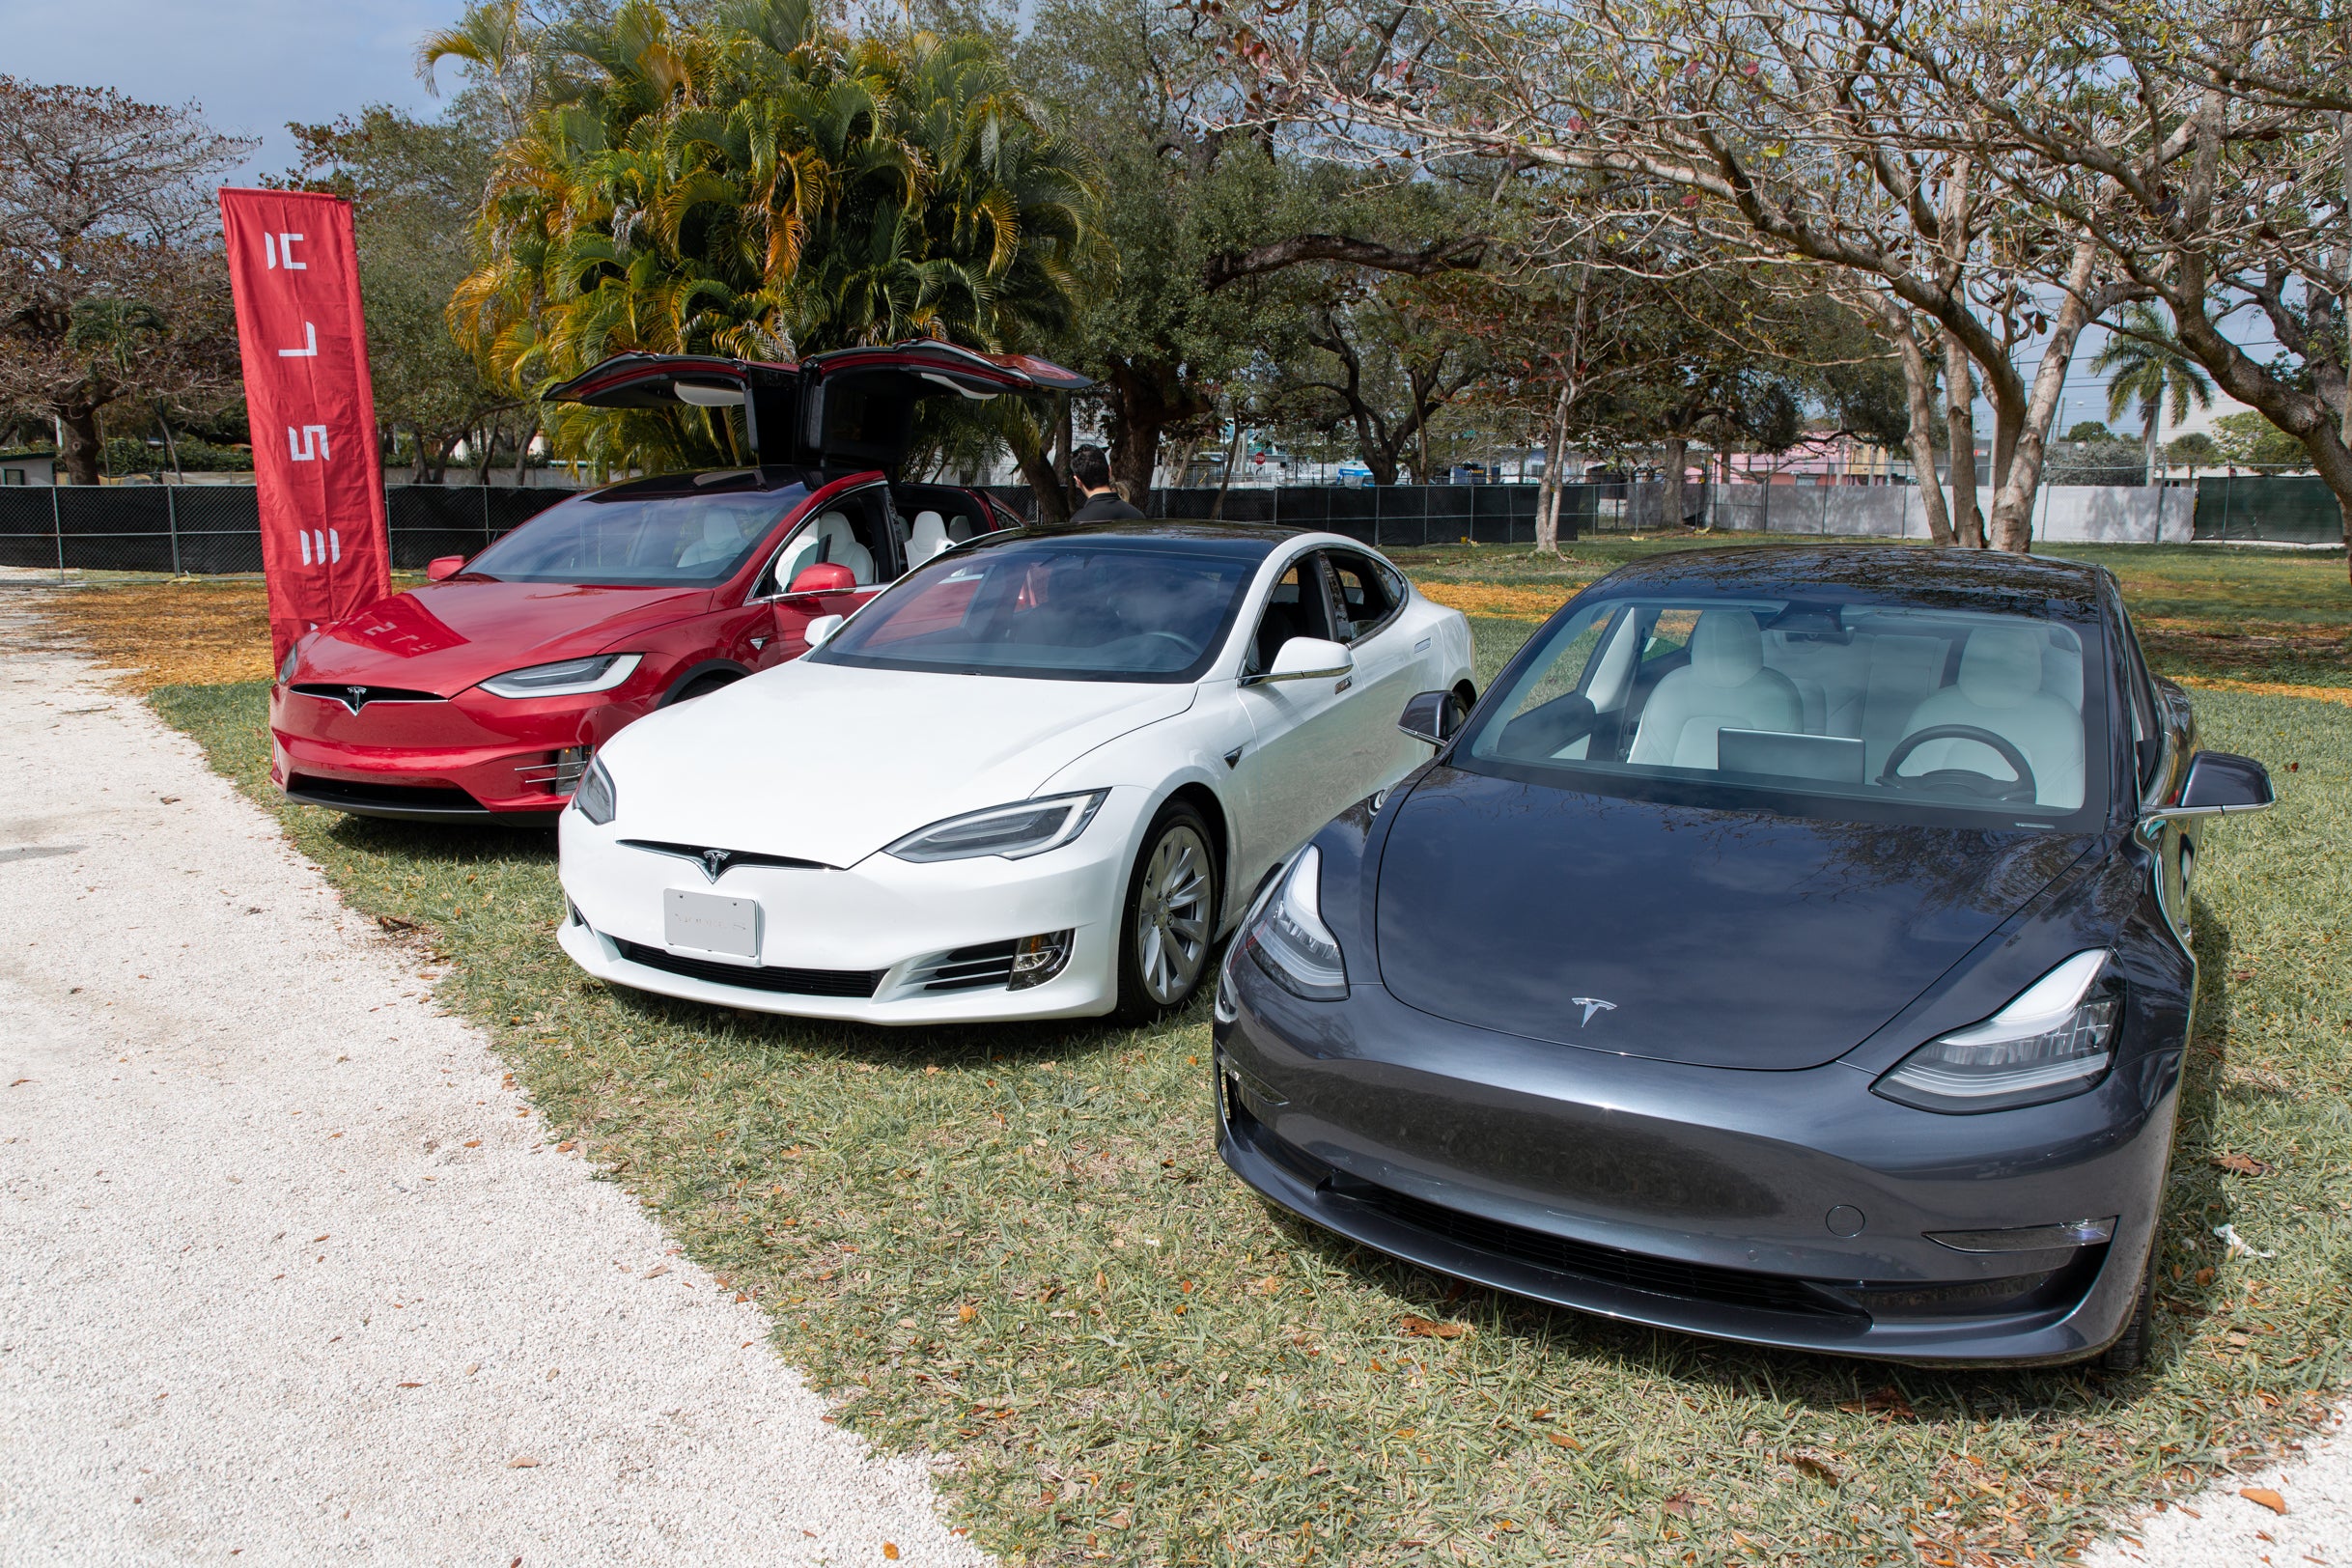 Tesla wins with four out of the 10 most American-made cars and more